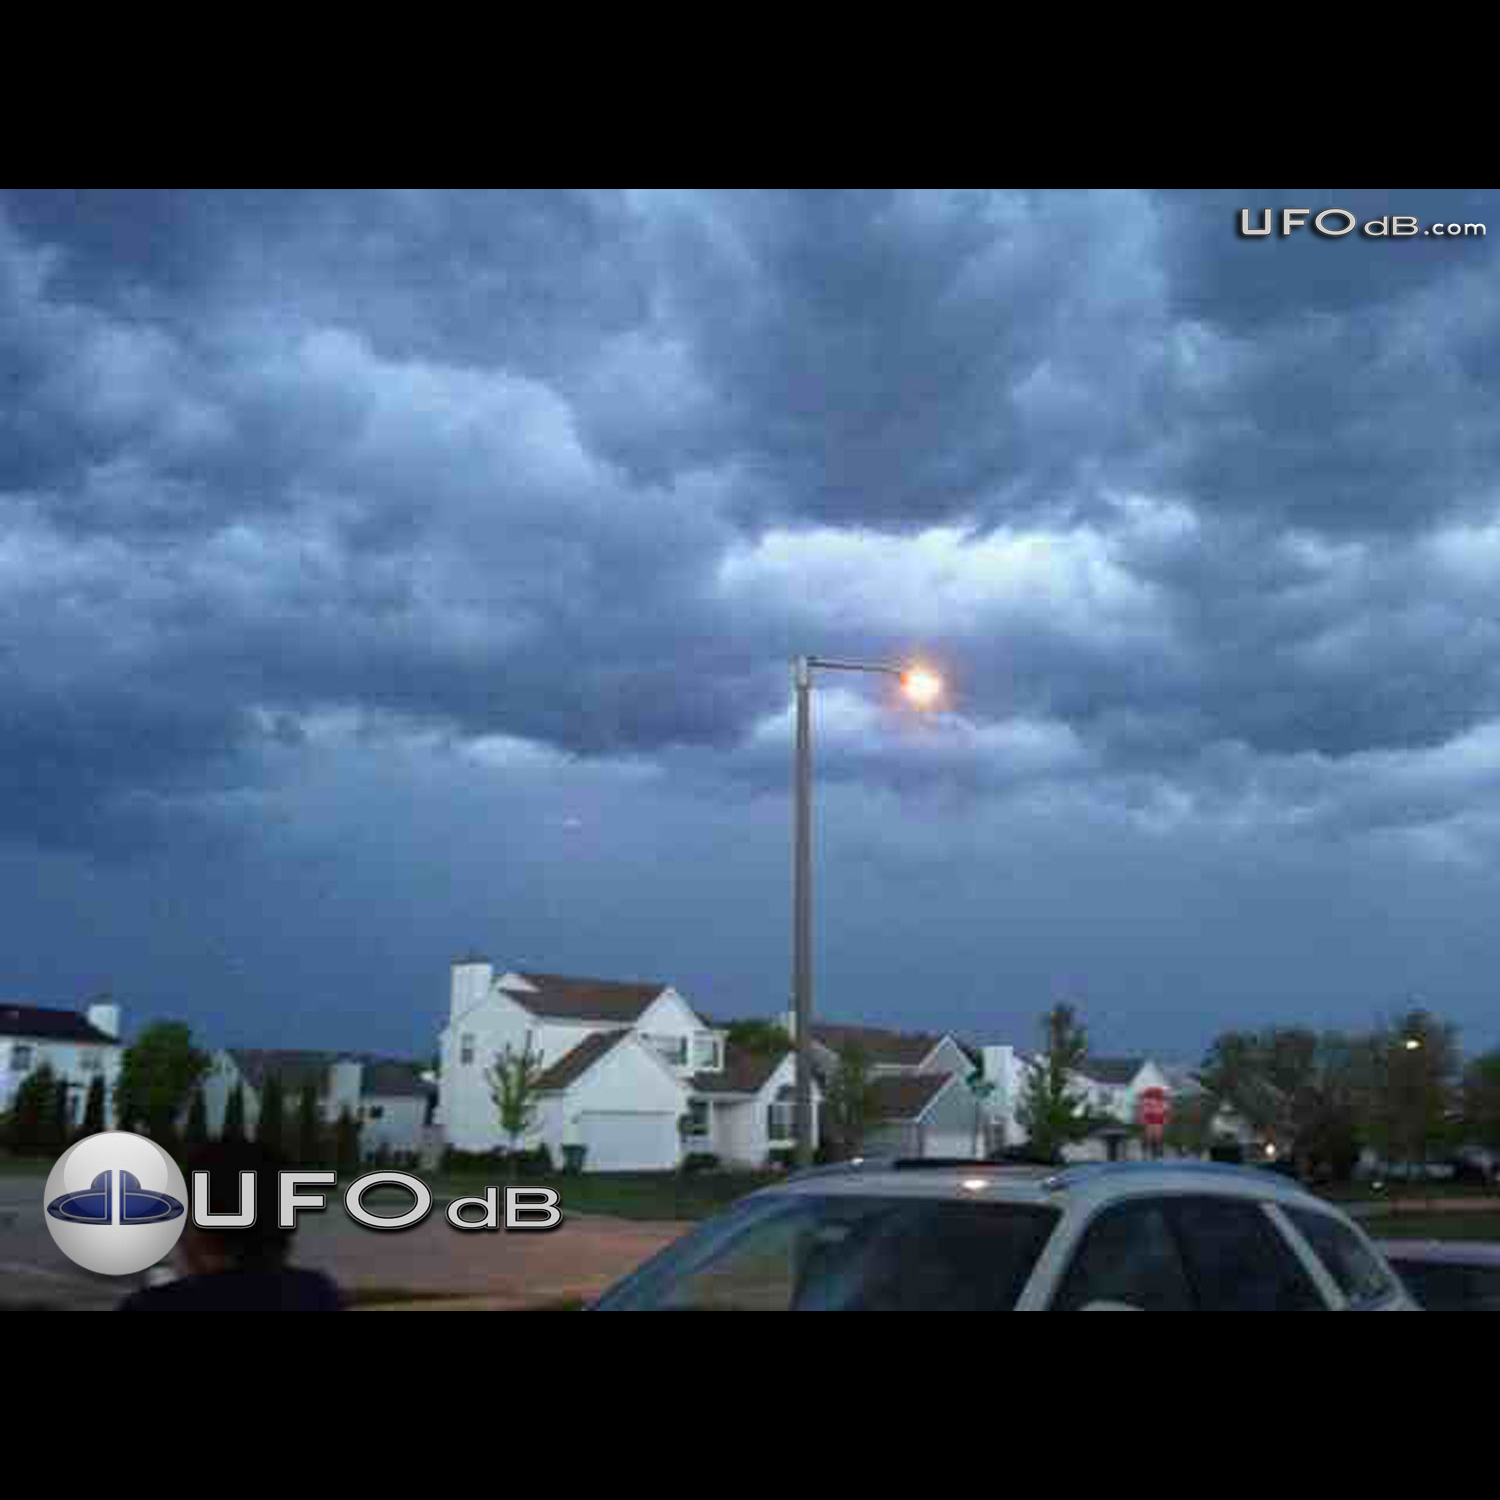 Zion Thunderstorm picture reveal a glowing UFO | USA | May 22 2011 UFO Picture #324-1